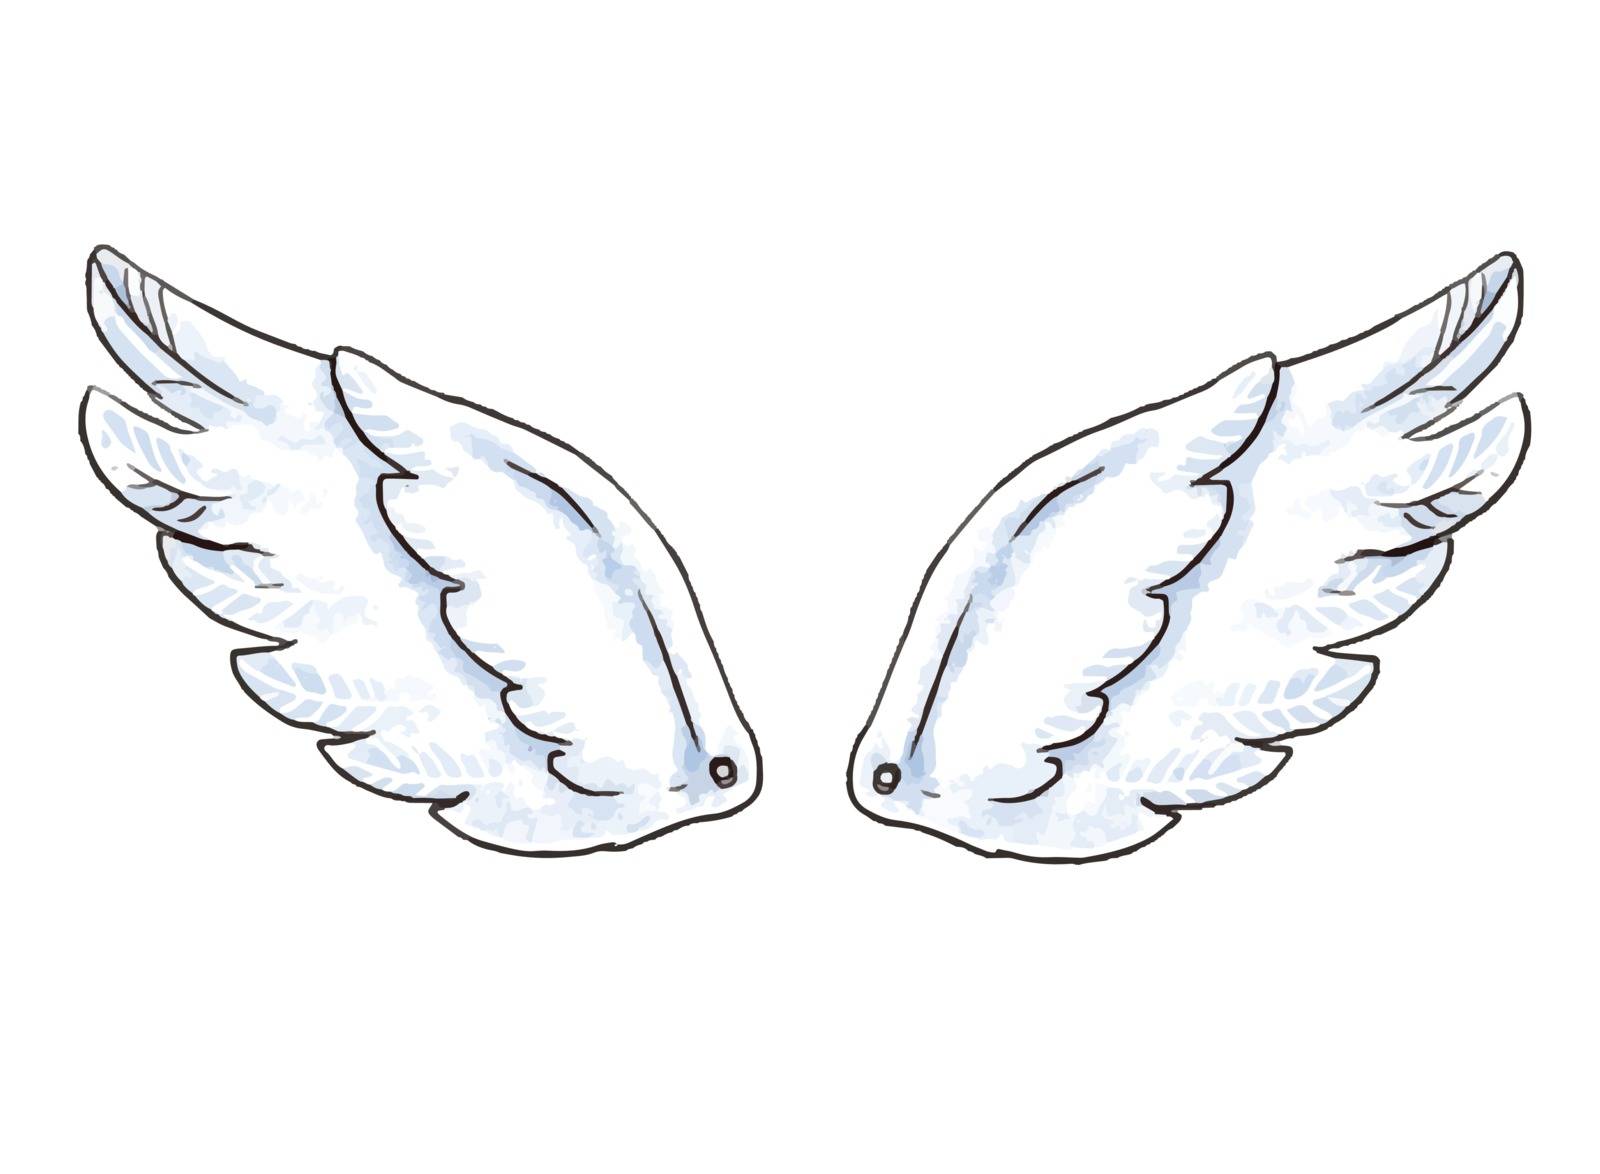 Cute cartoon wings. Vector illustration with white angel or bird wing icon  isolated. Stock Image | VectorGrove - Royalty Free Vector Images with  commercial license